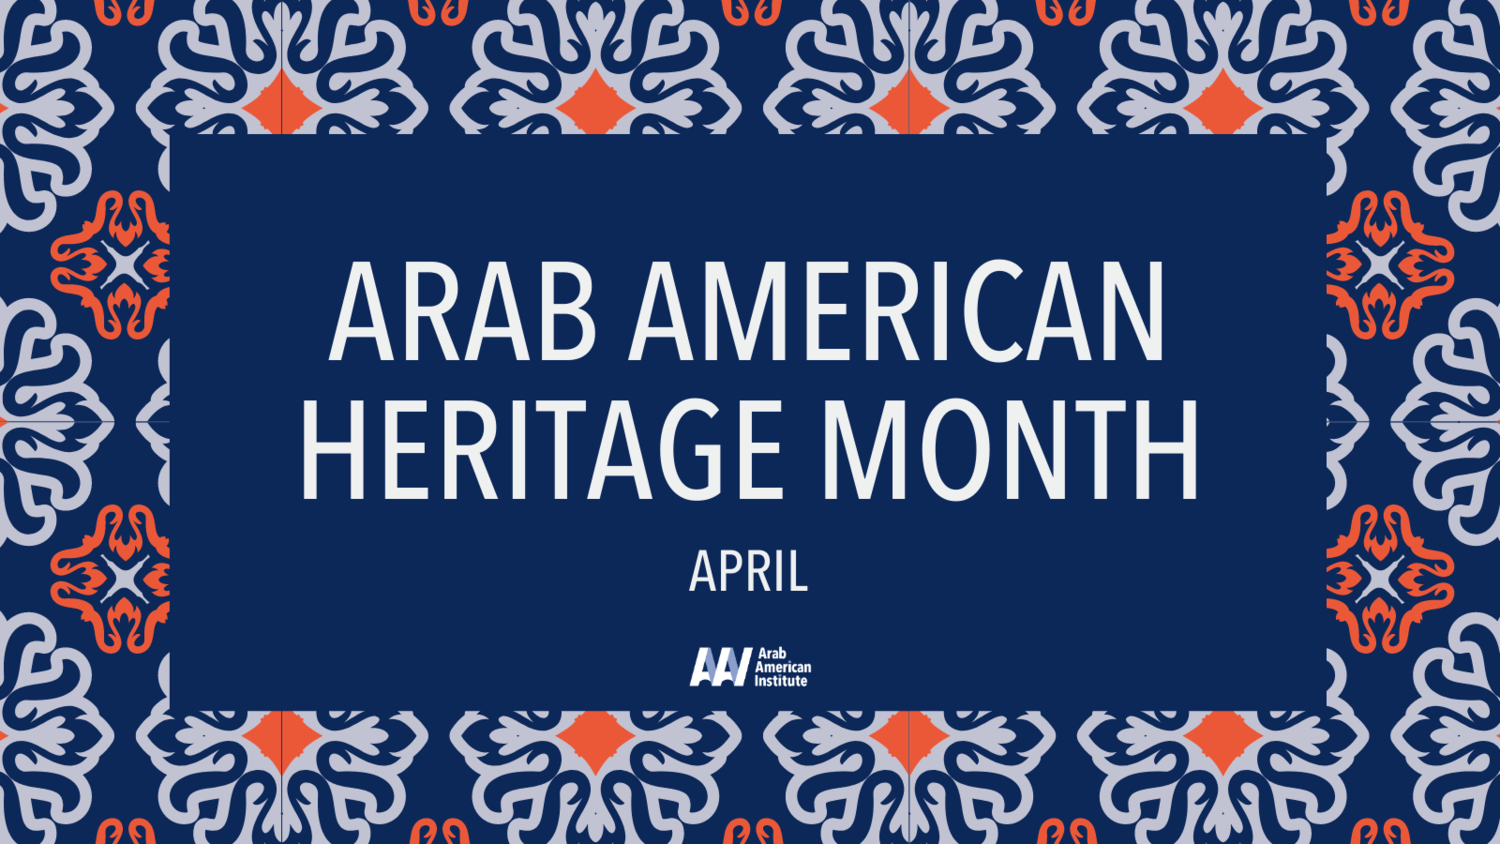 The significance of Arab American Heritage Month  